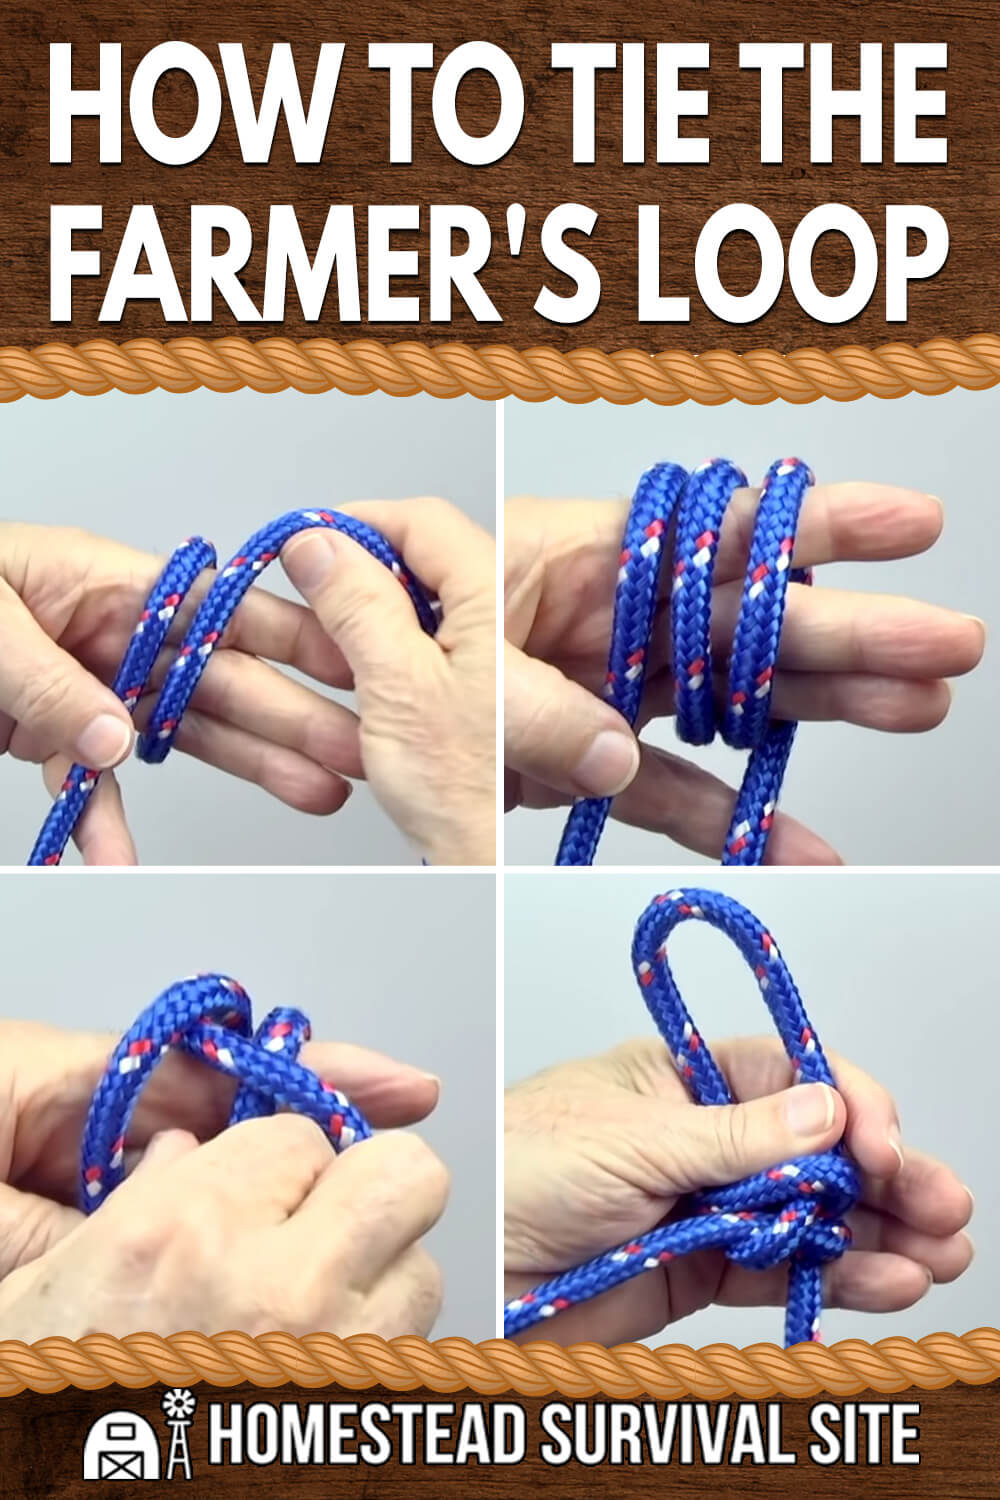 How To Tie The Farmer's Loop